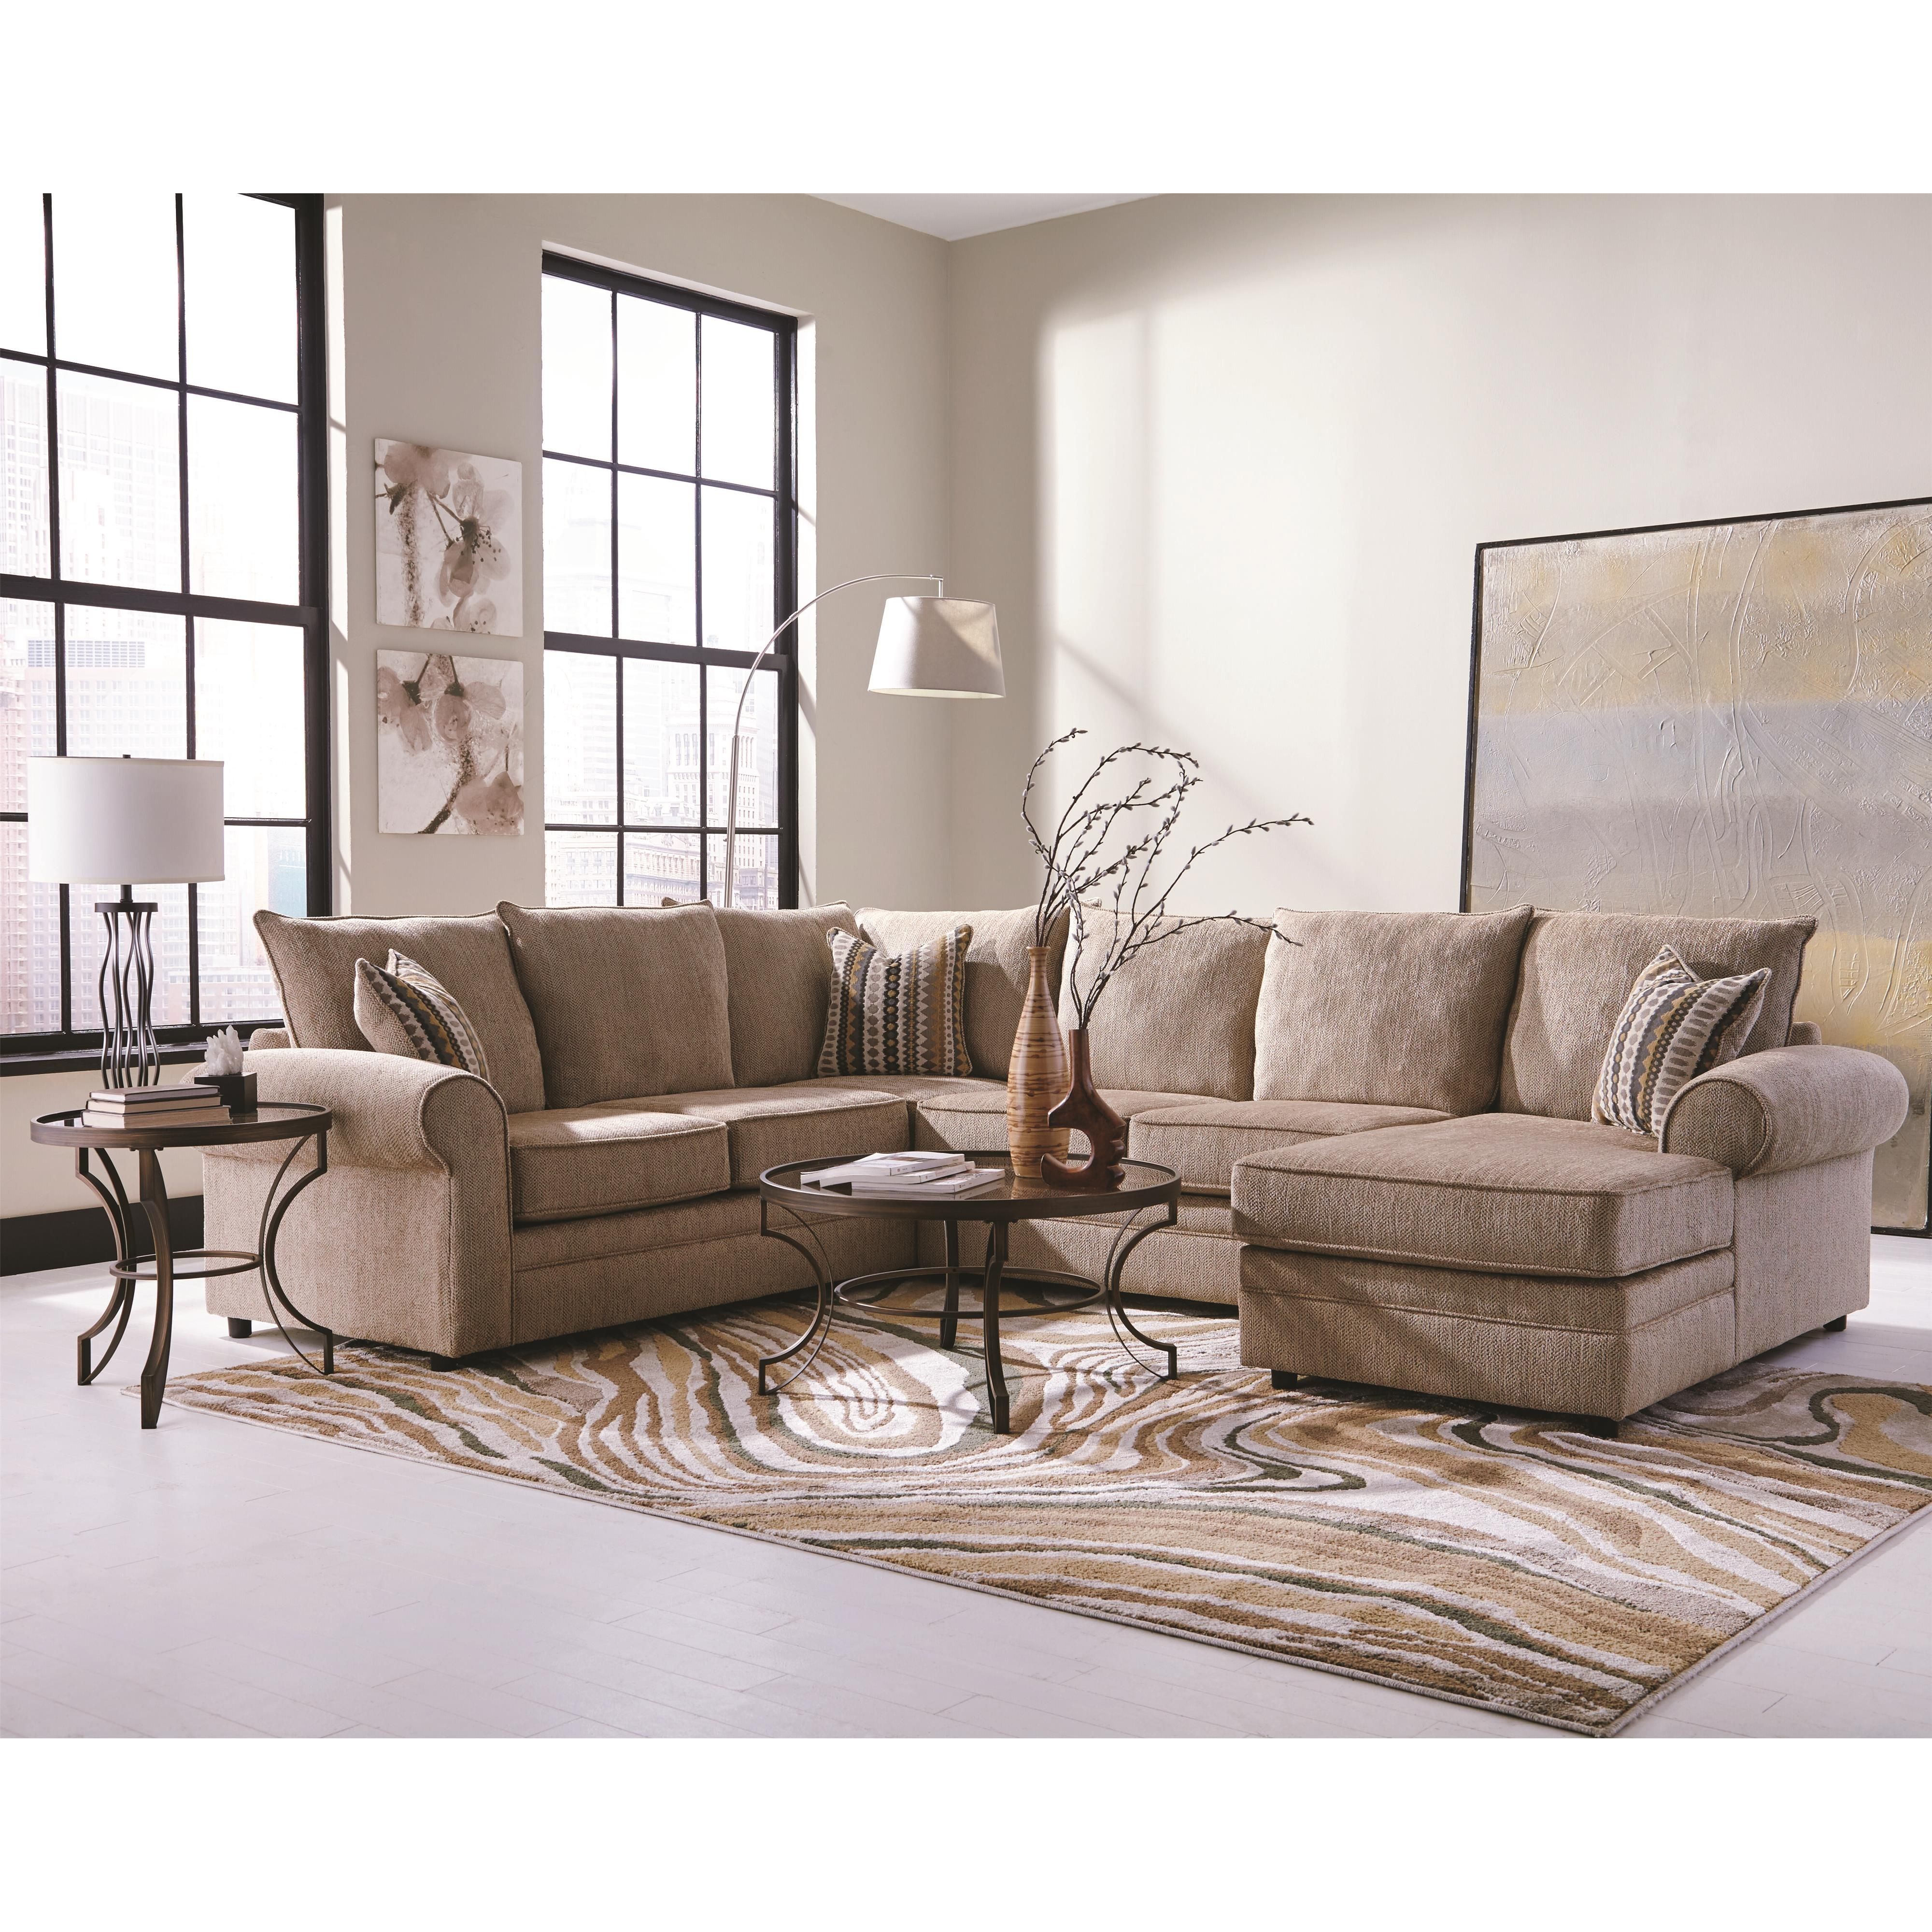 Coaster Fairhaven Cream Colored U Shaped Sectional With Chaise Regarding U Shaped Sectionals (View 12 of 15)